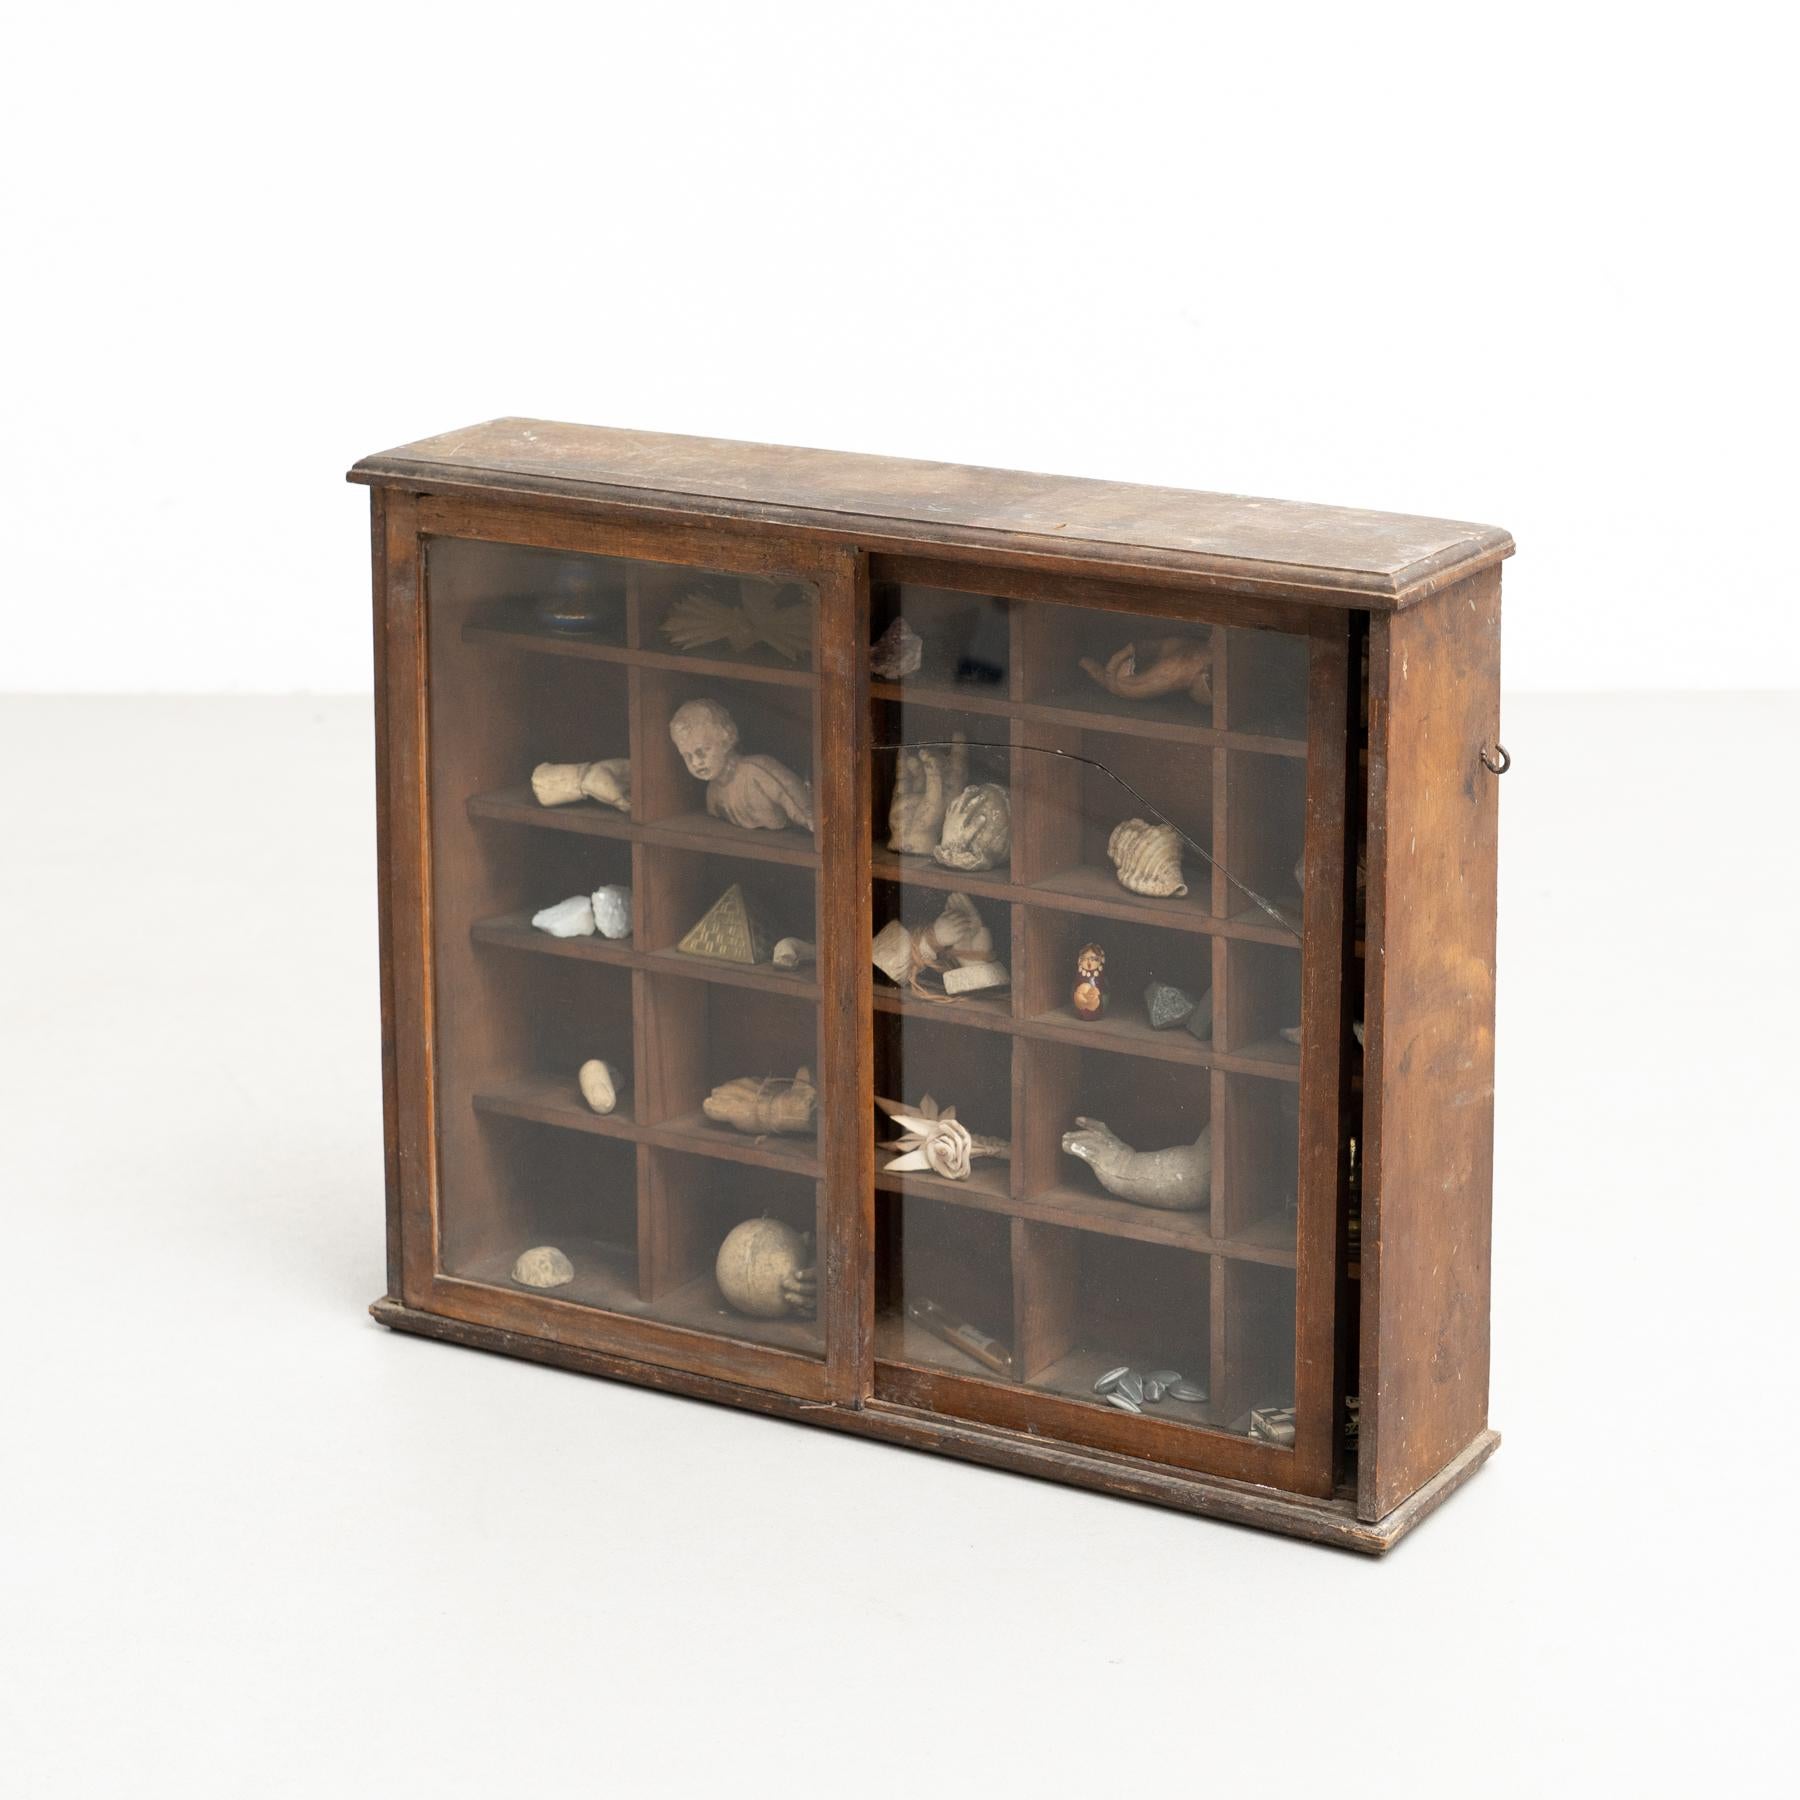 Spanish Cabinet of Curiosities Sculptural Artwork on a Wooden Cabinet, circa 1950